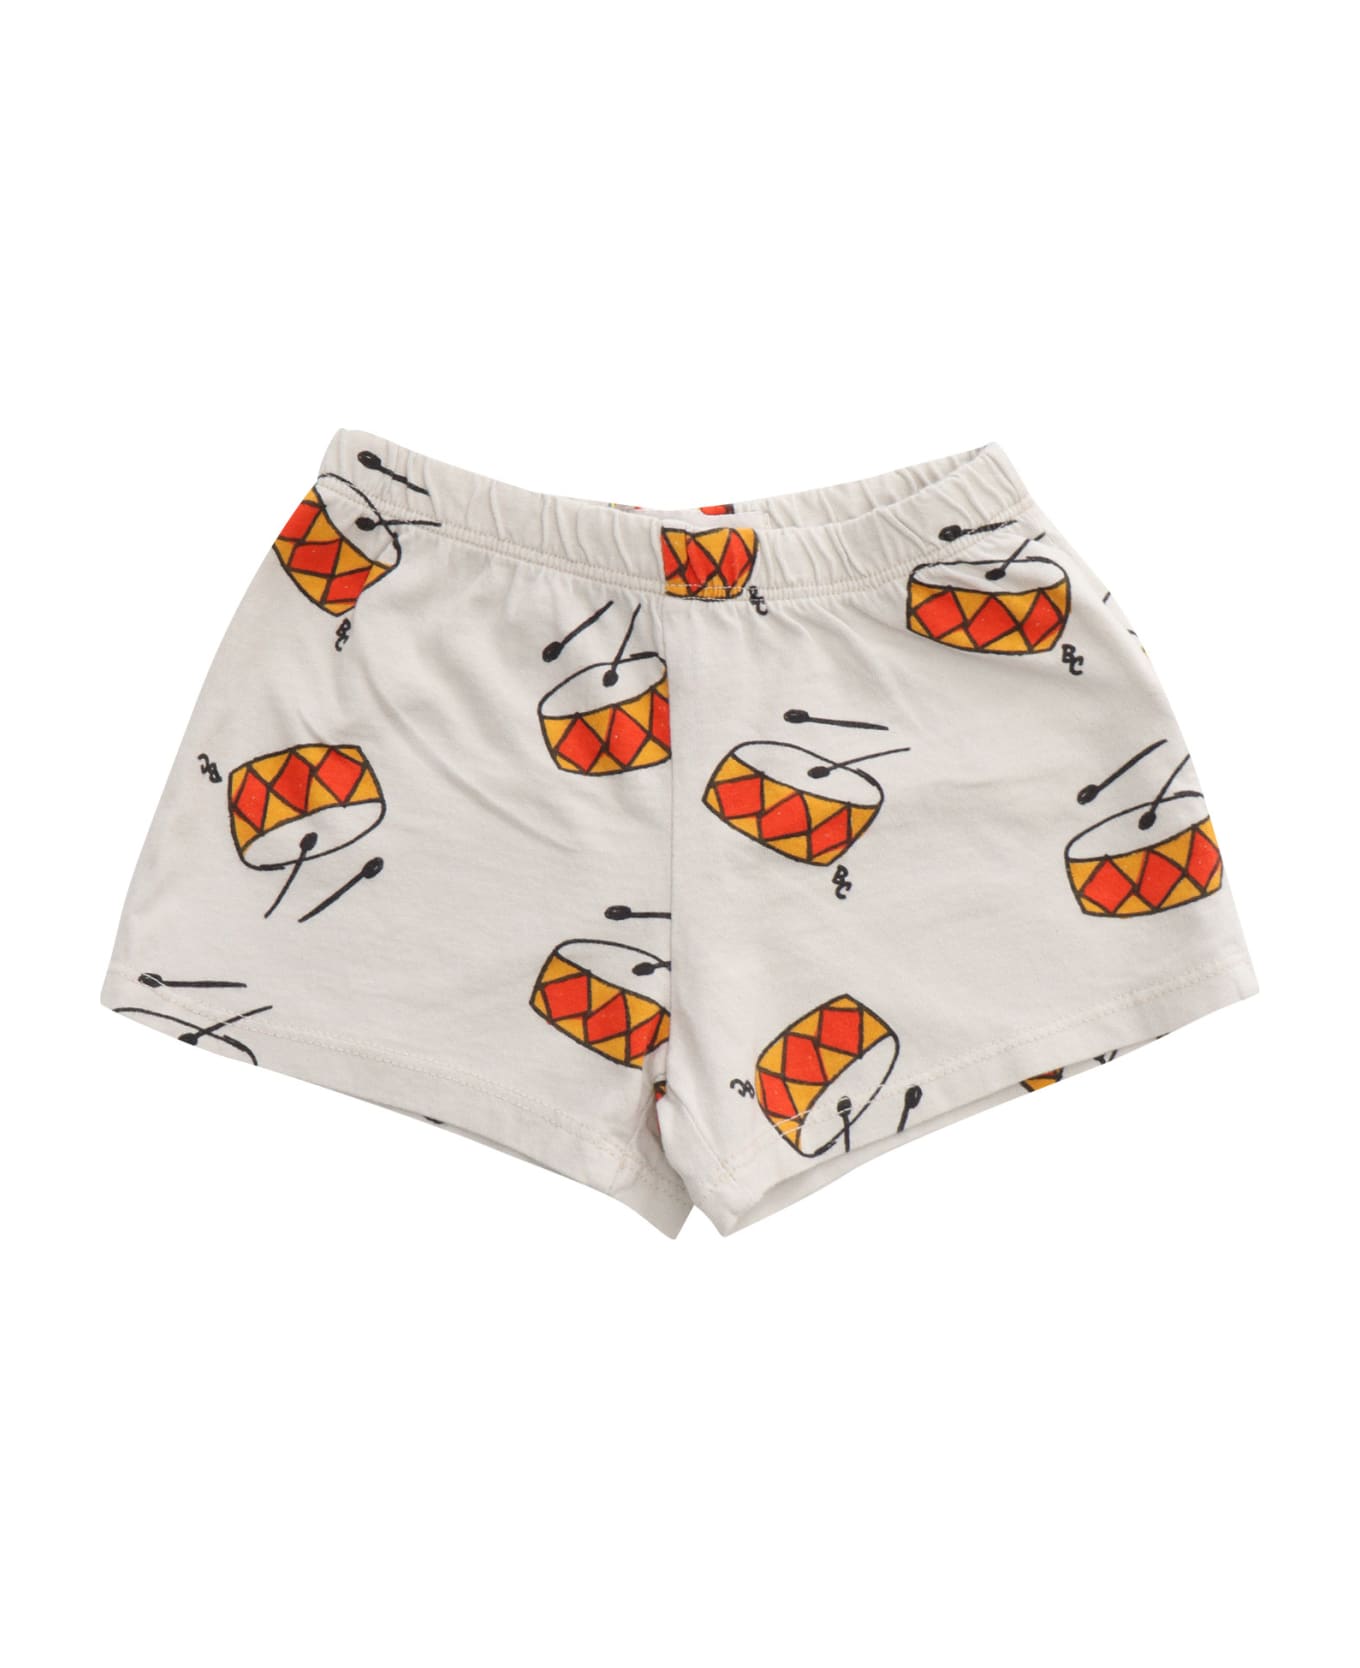 Bobo Choses White Shorts With Prints - BEIGE